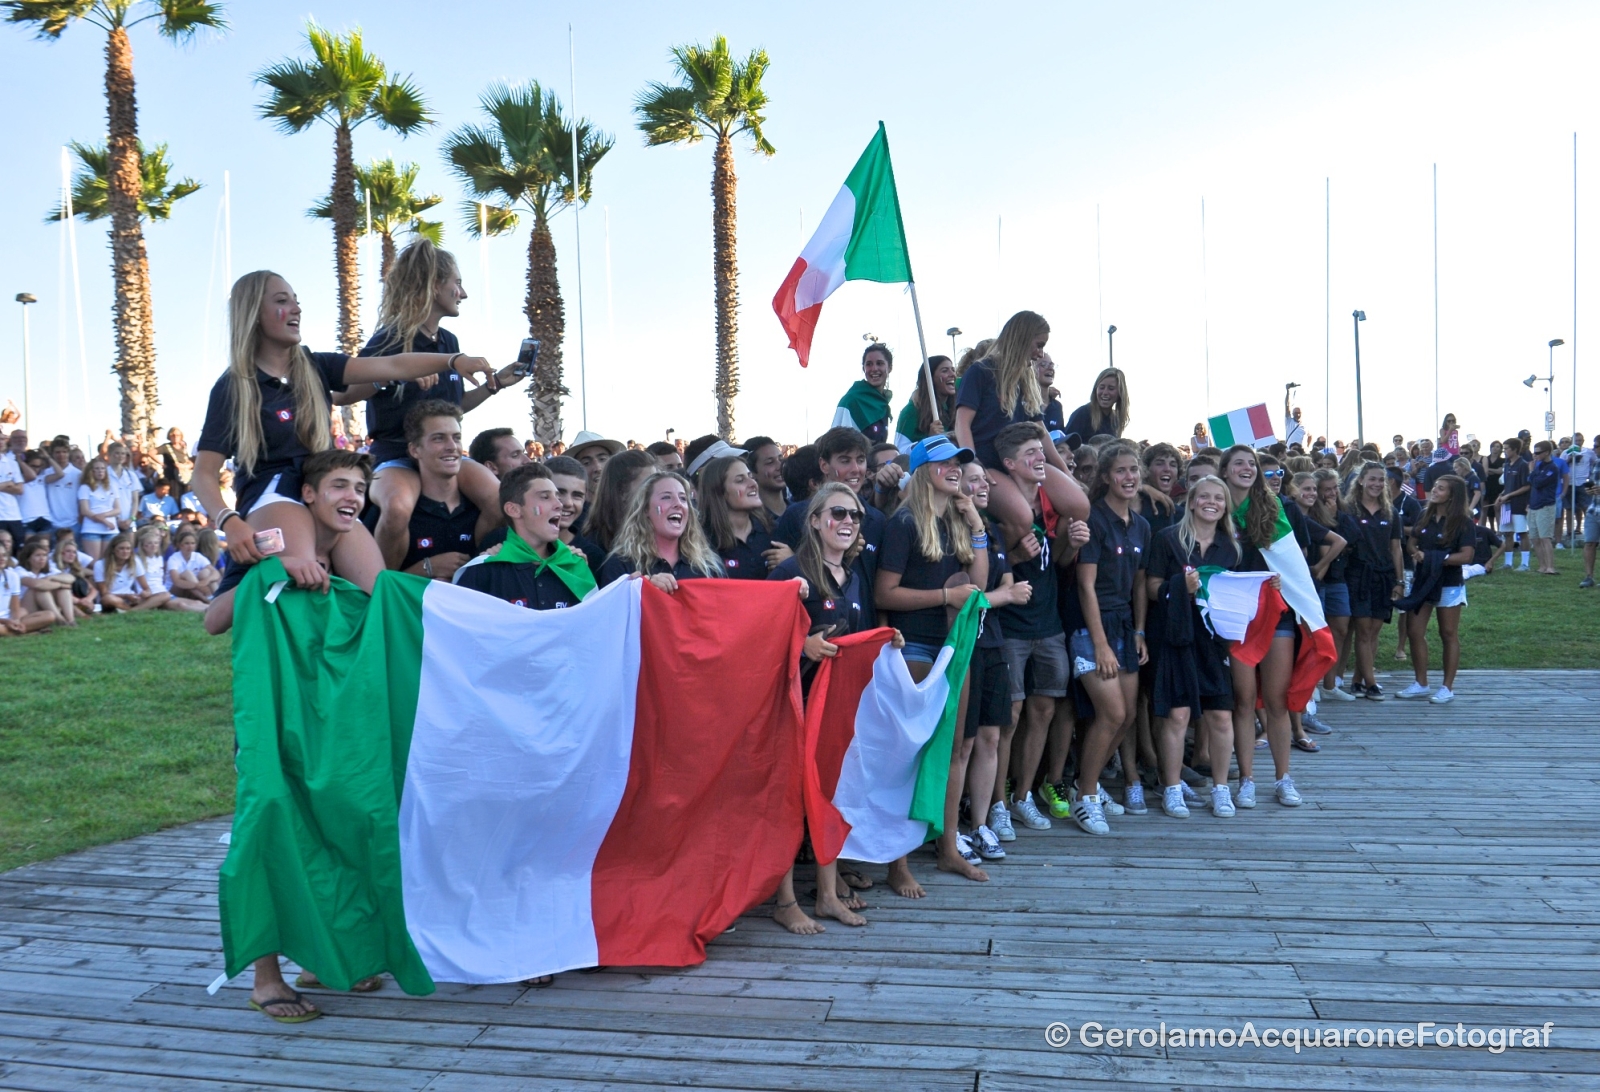 Host nation, Italy, feature largest team